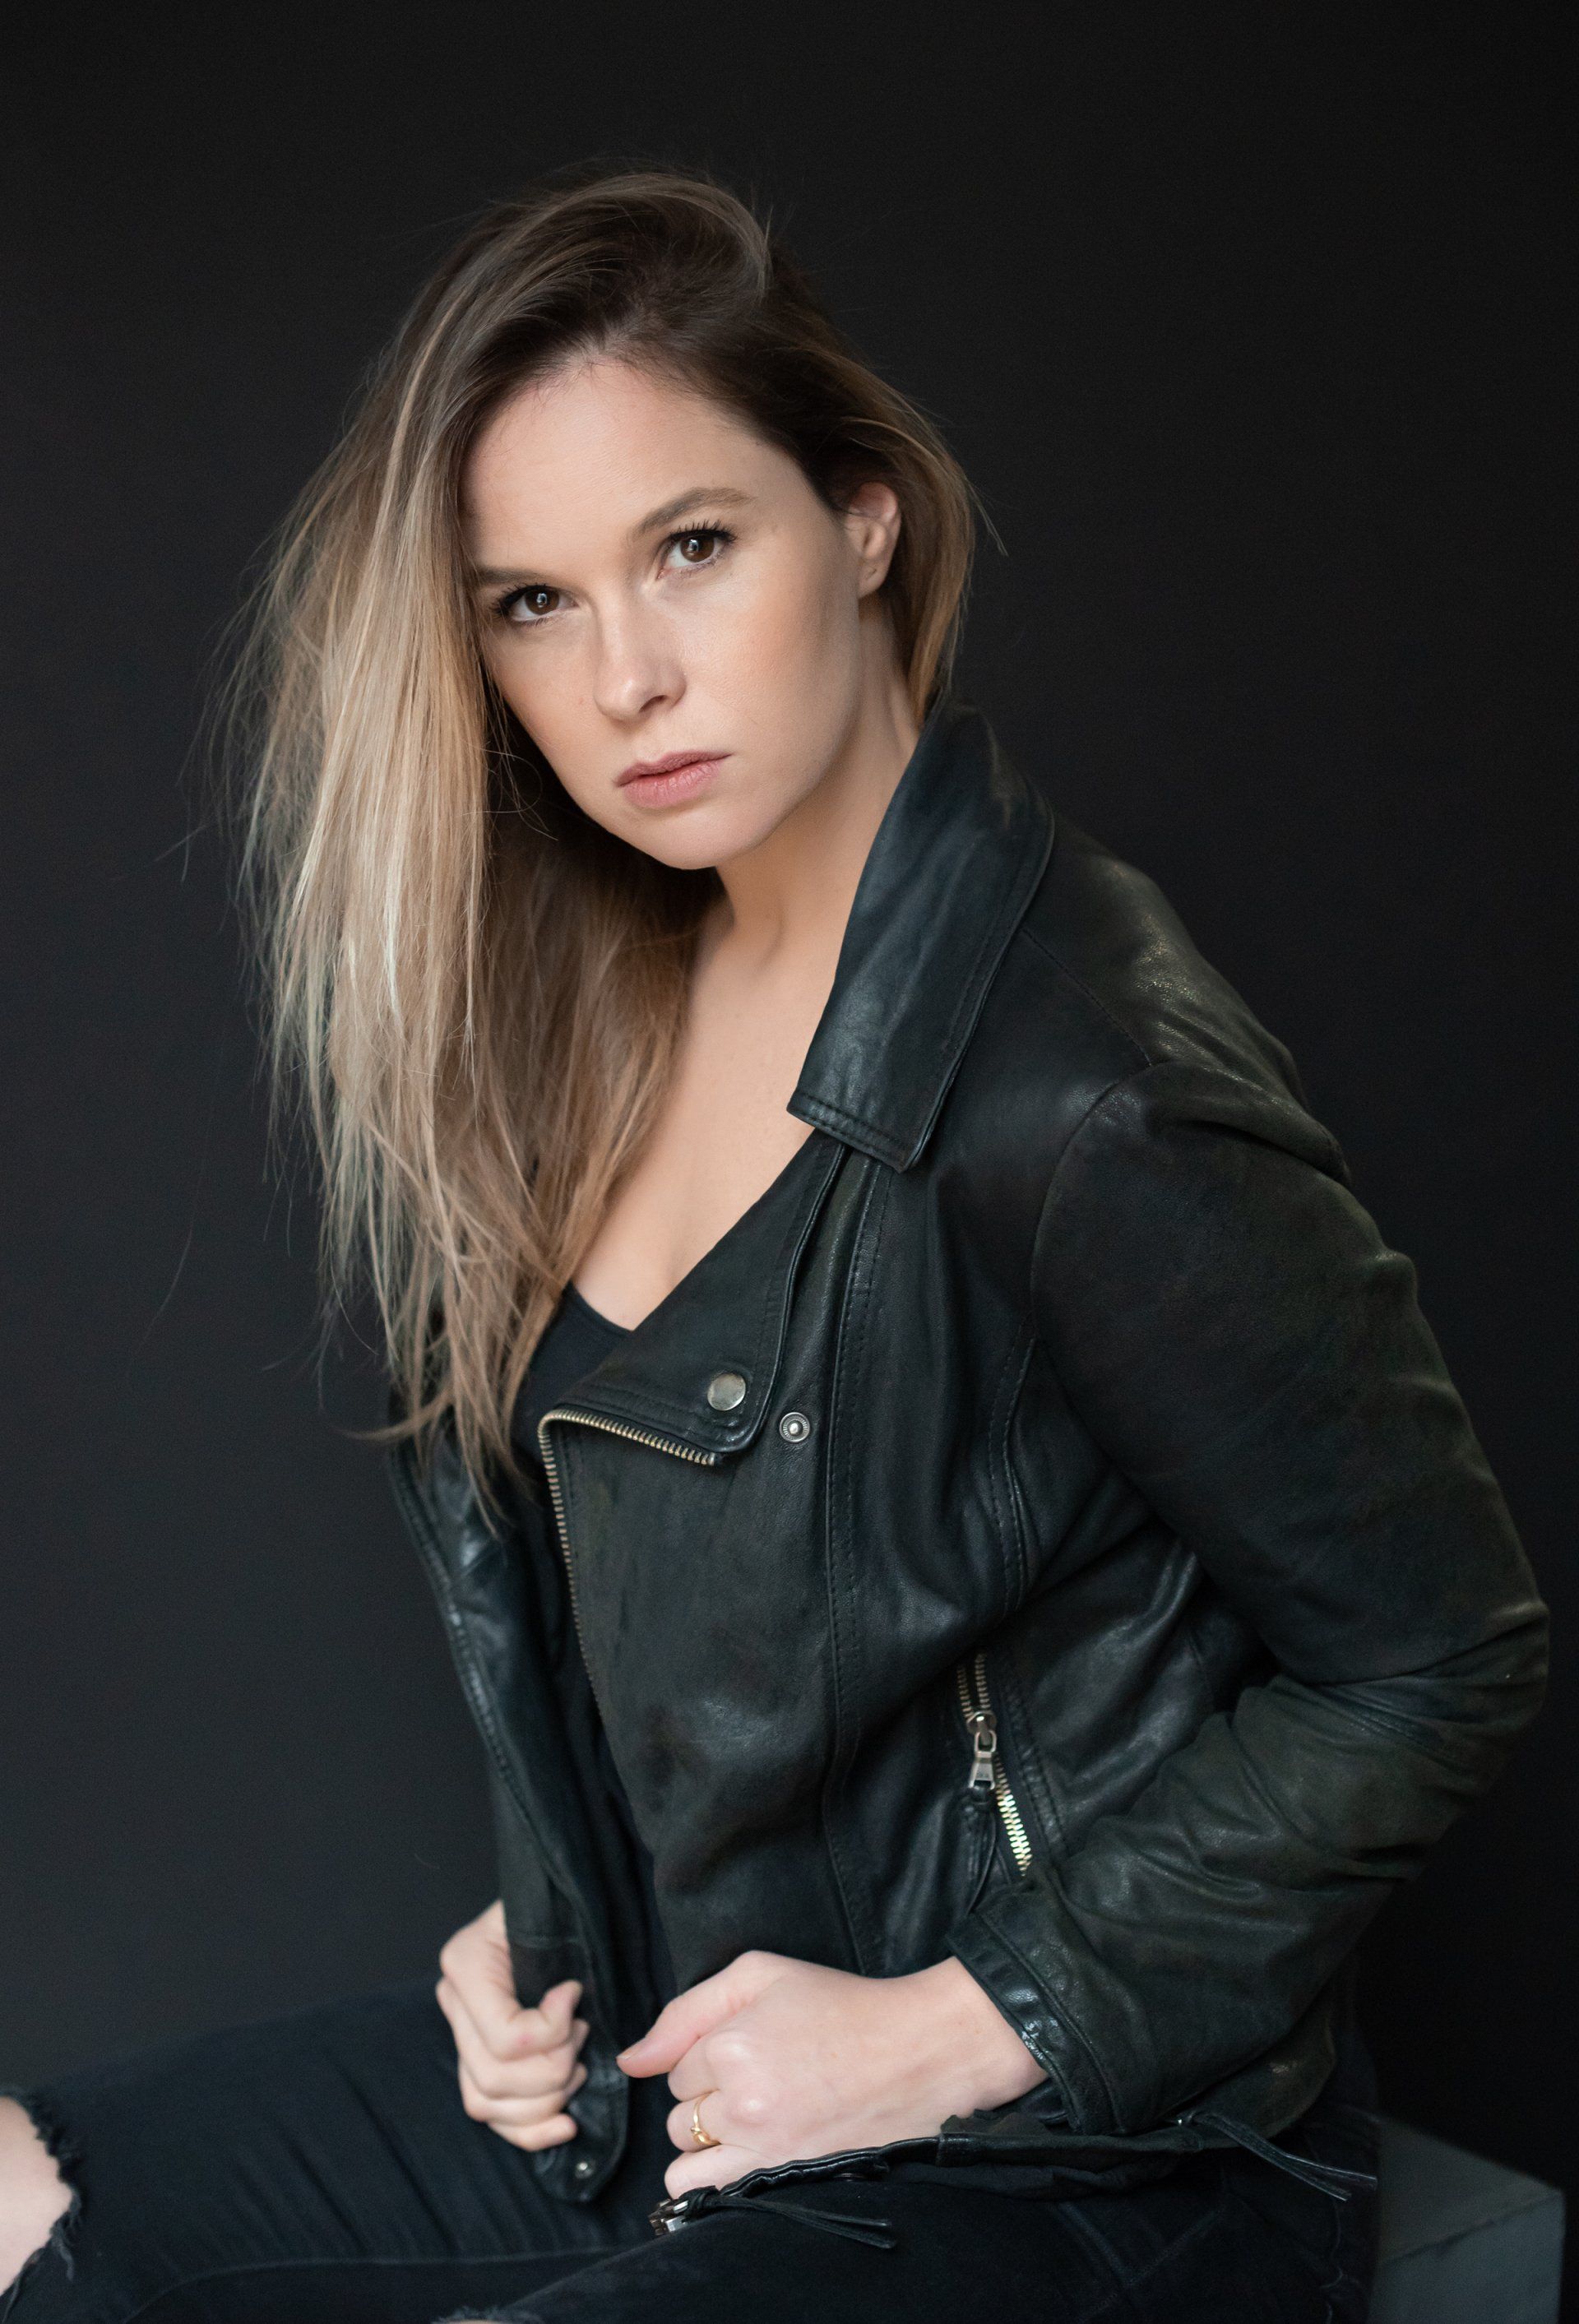 Professional Portrait Photography | Stacey Naglie Toronto  | Woman in black leather jacket